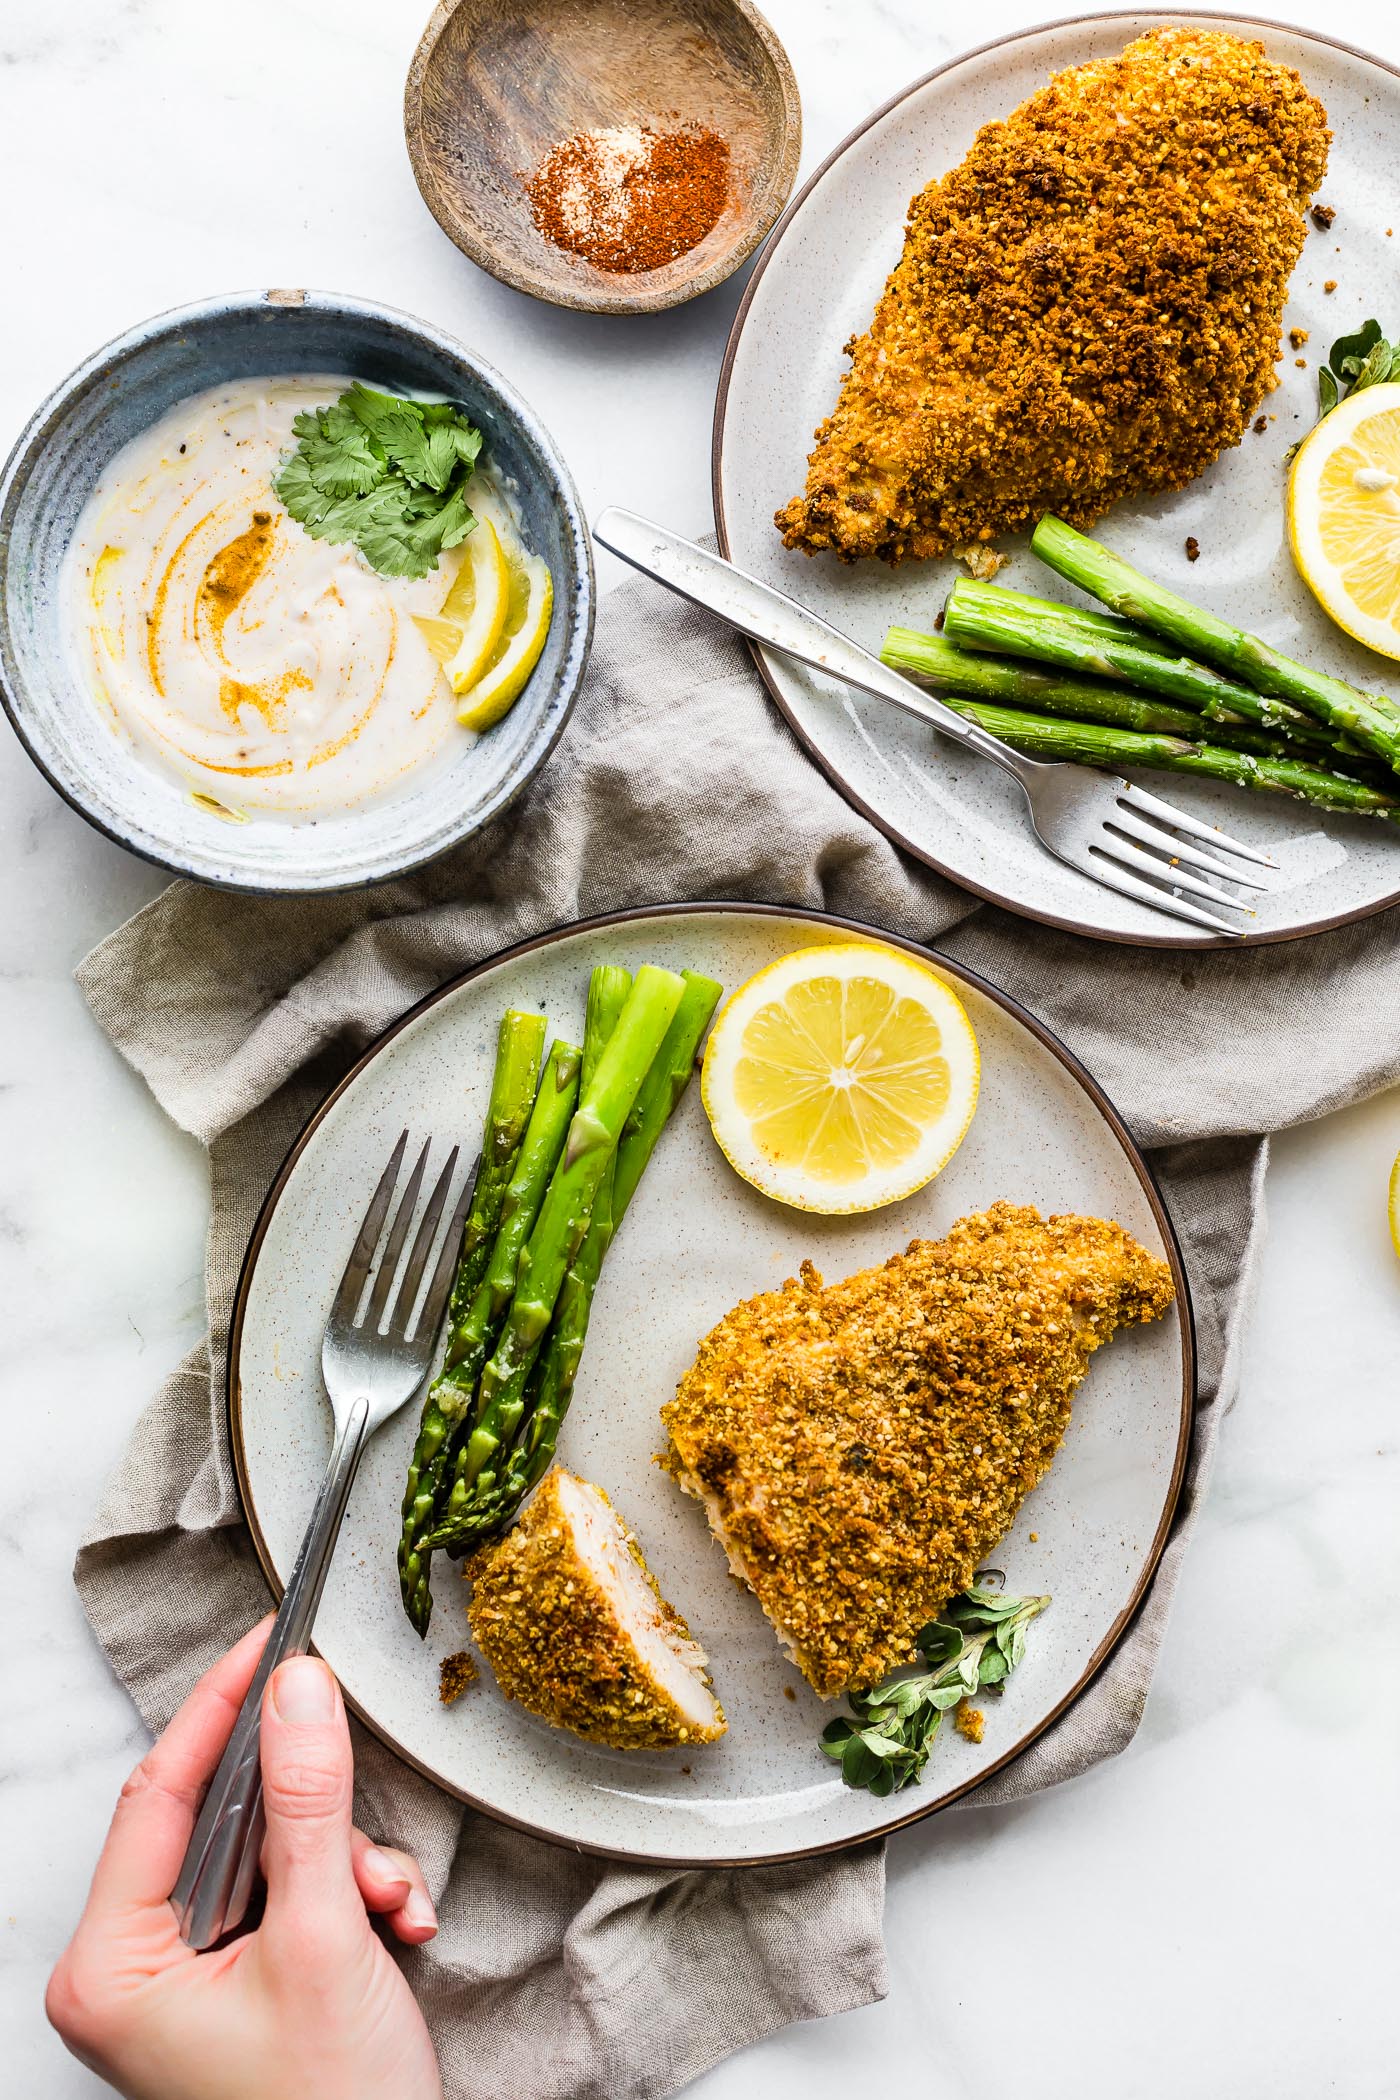 Gluten-free Panko Crusted Paprika Chicken recipe! A baked chicken recipe with gluten-free panko bread crumbs and paprika spices! Easy, quick, one pan meal.